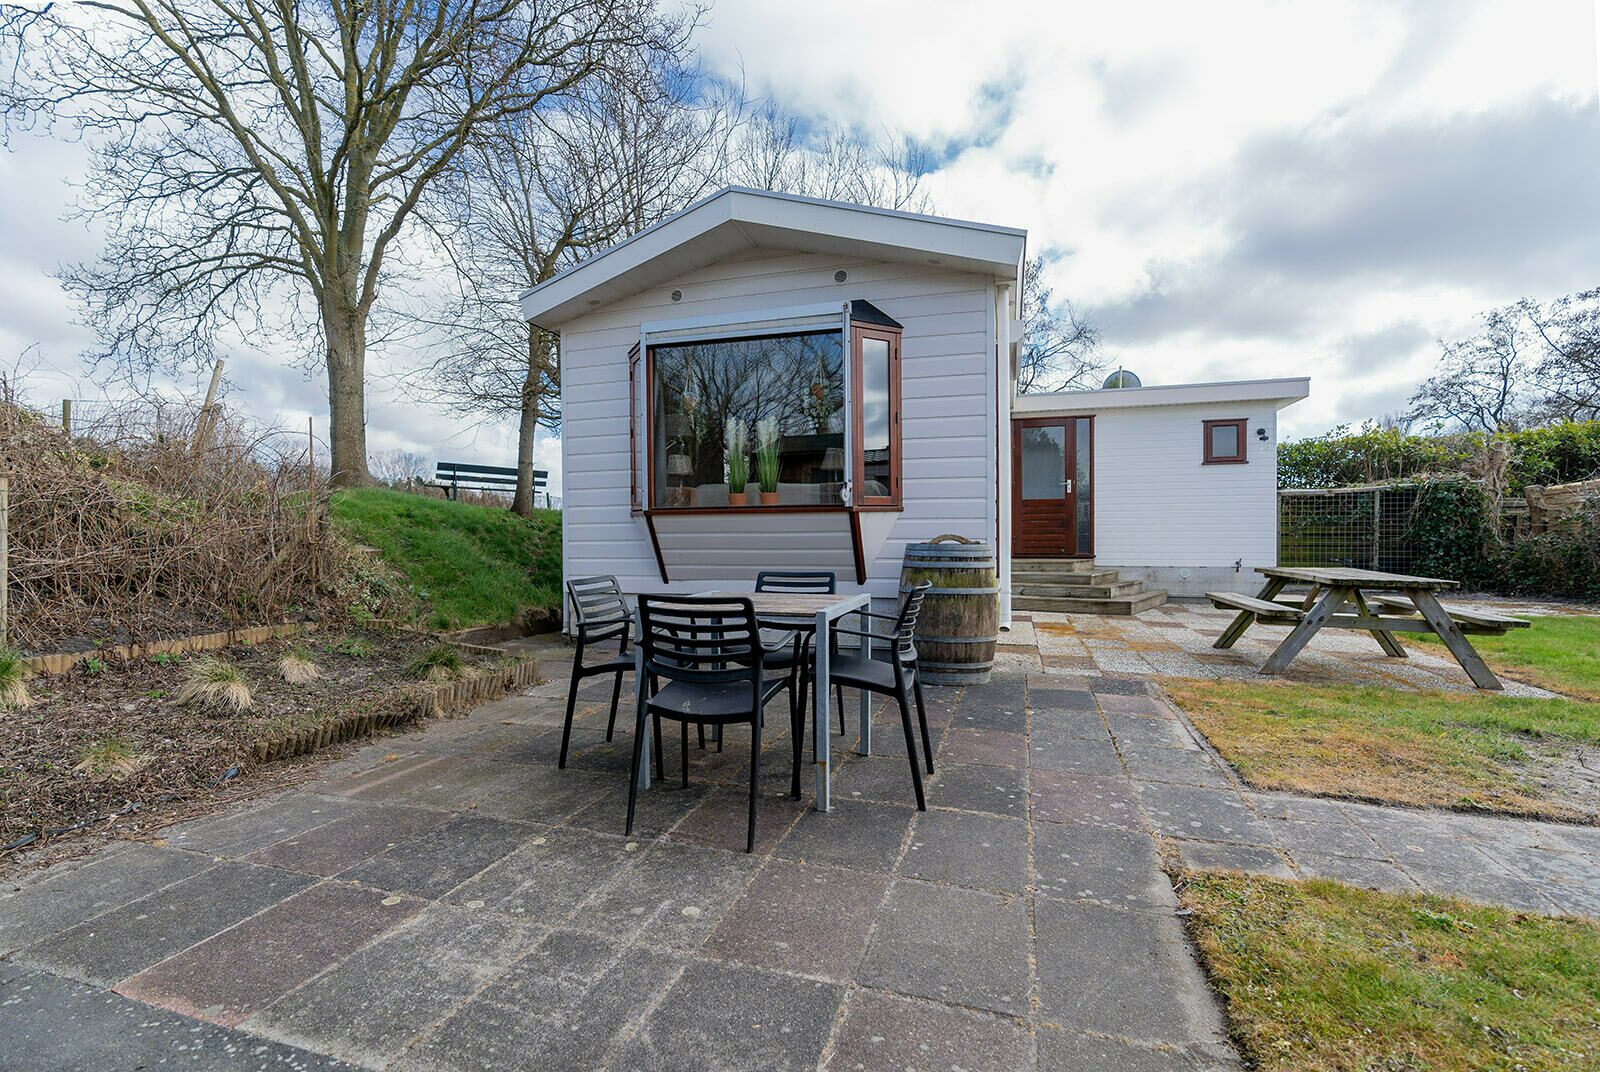 Chalet 41 - Haayse Bos Ouddorp